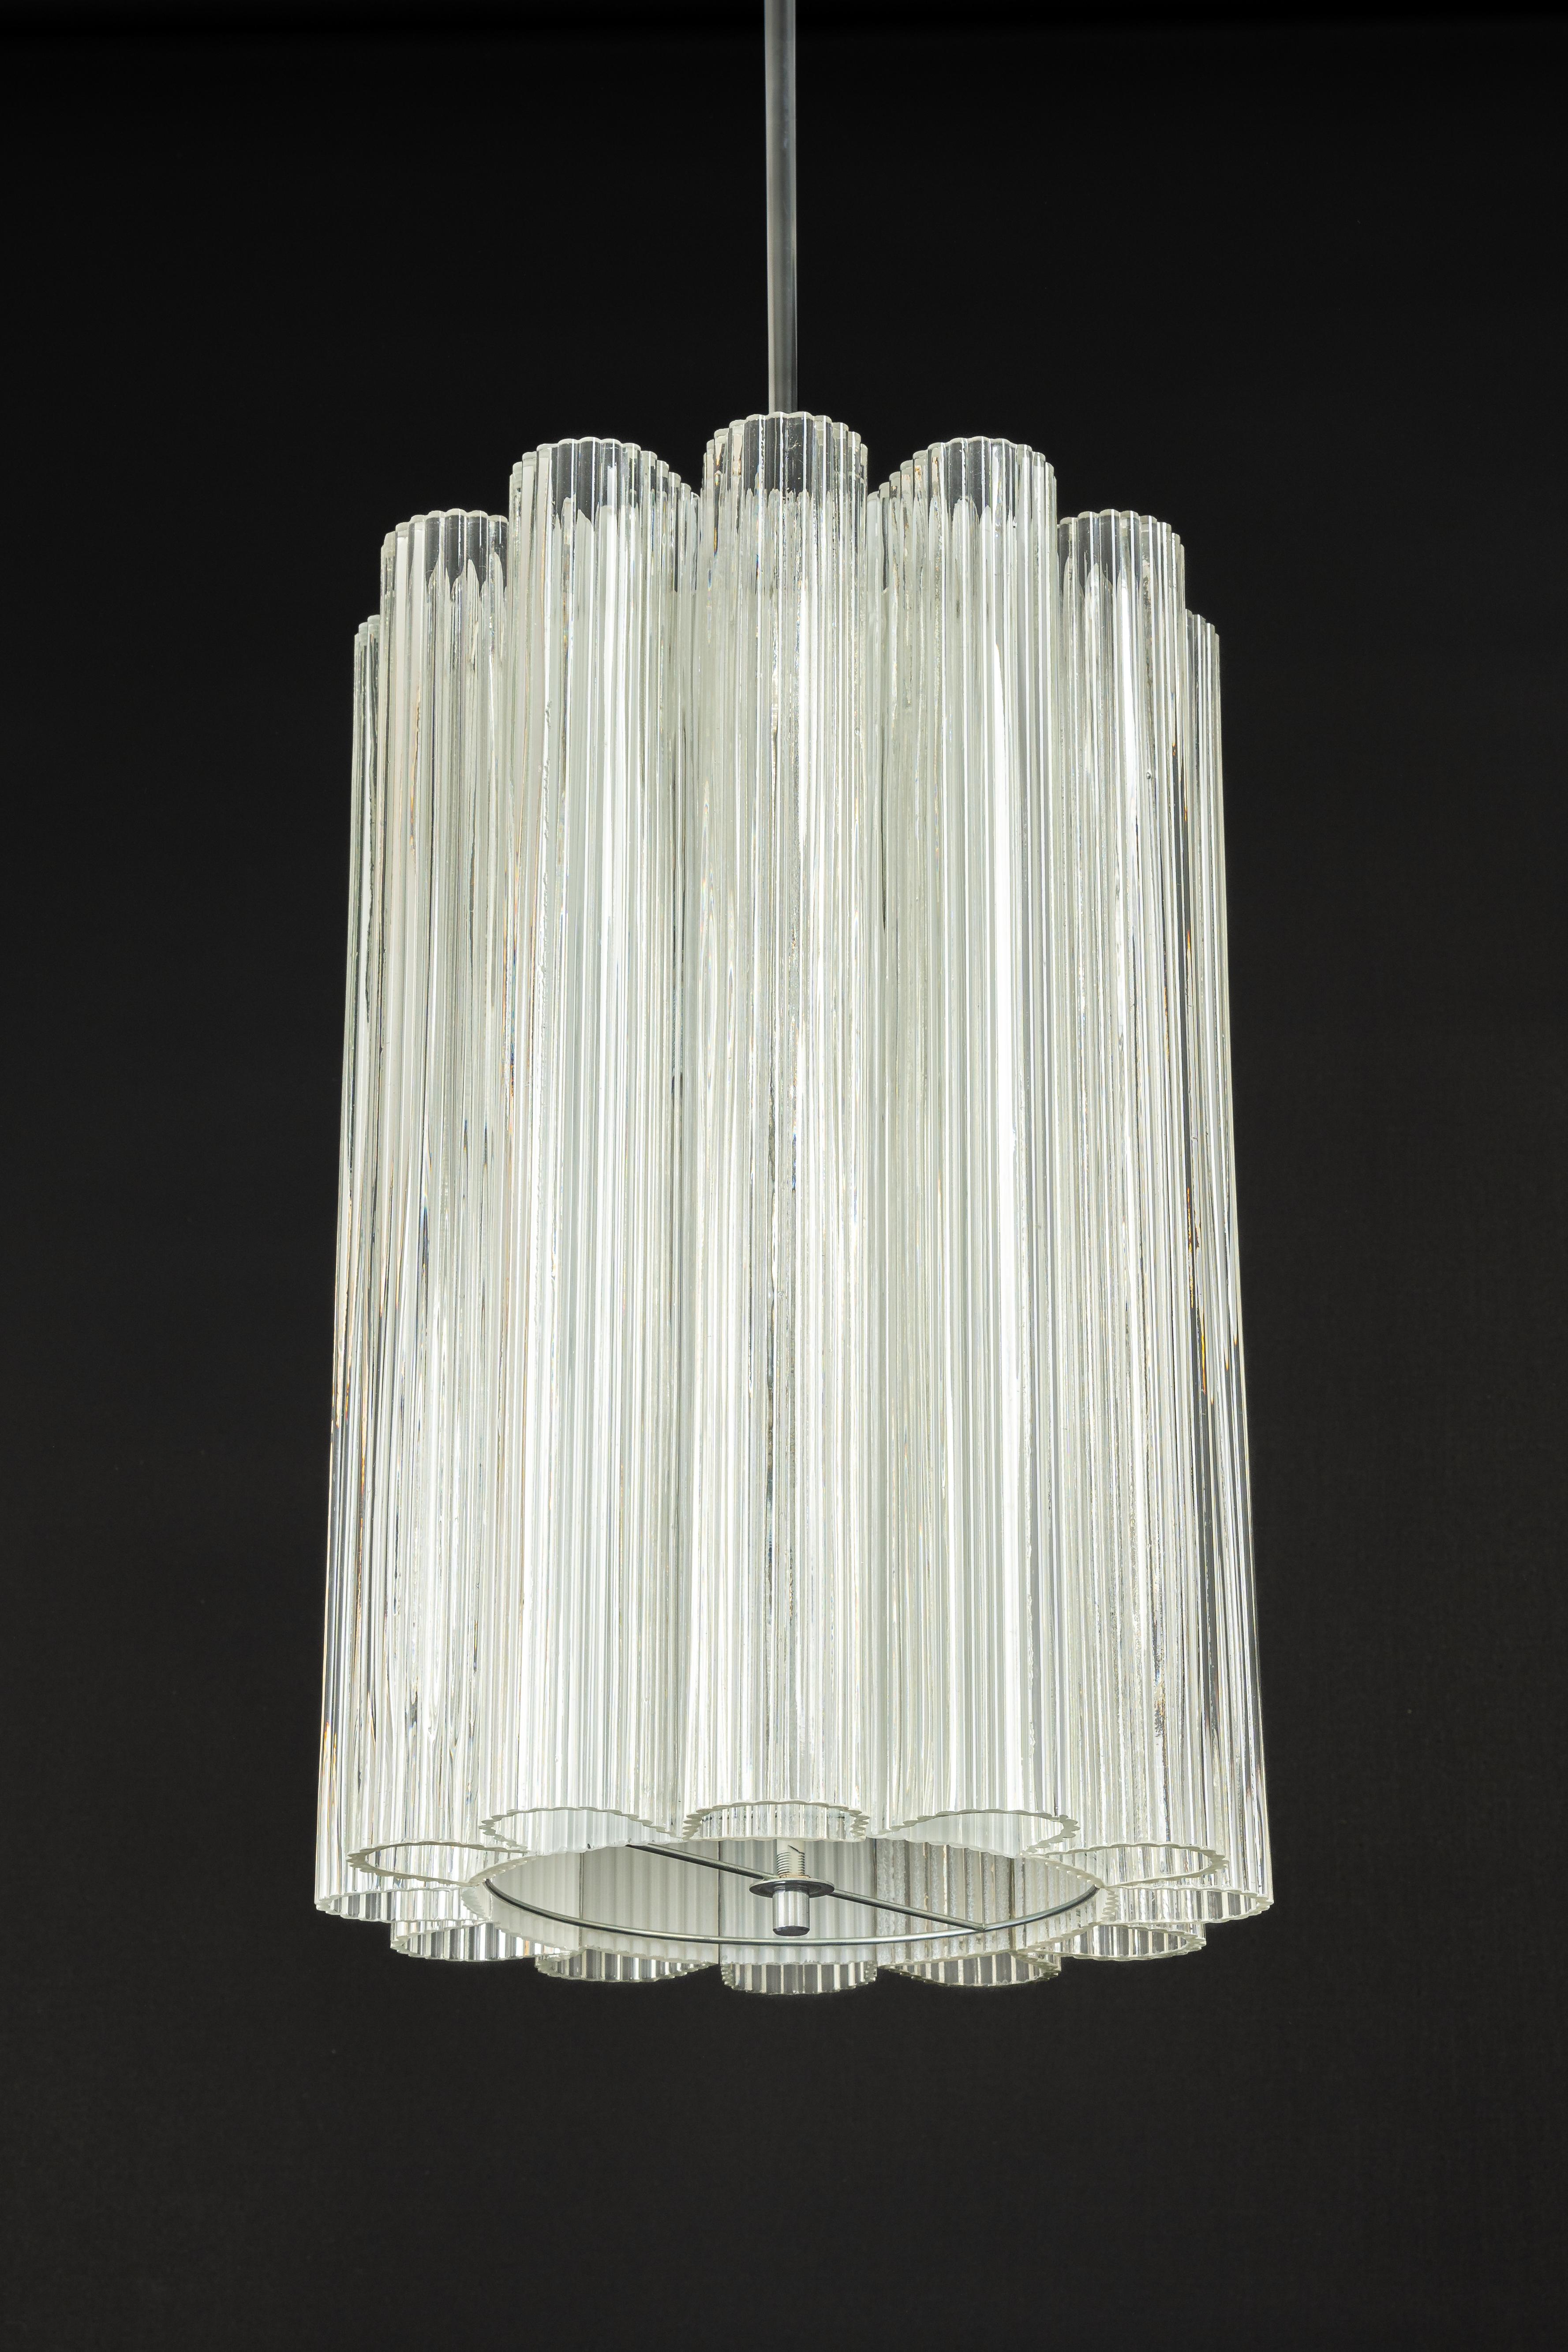 1 of 2 Cylindrical Pendant Fixture with Crystal Glass by Doria, Germany, 1960s For Sale 7